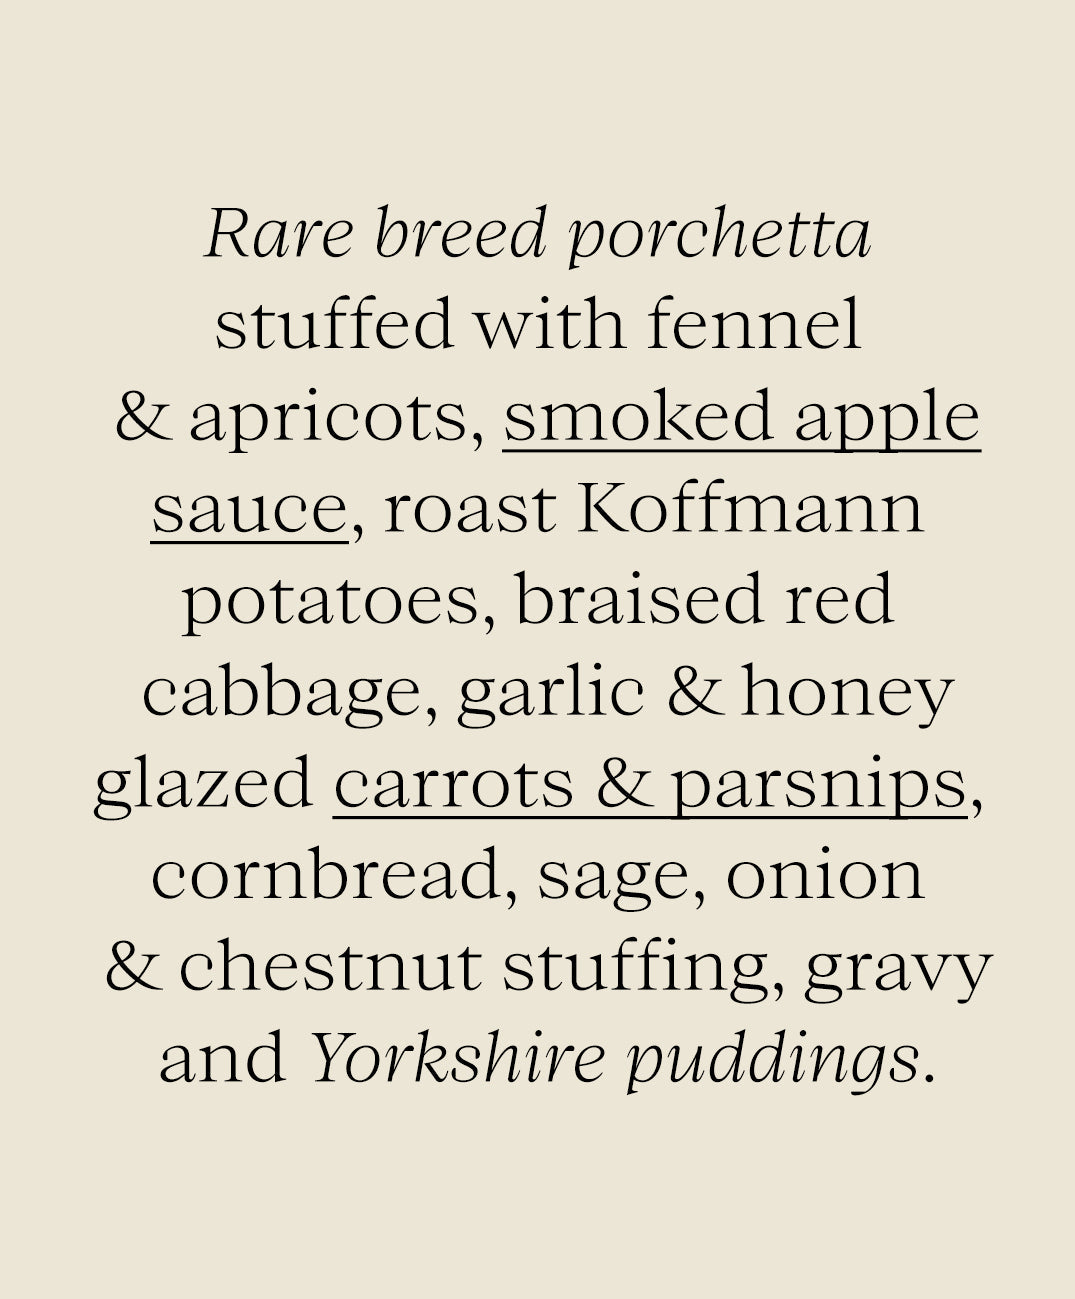 The Sunday Roast Collection - Porchetta Stuffed with Fennel and Apricots - Naked Wines Offer